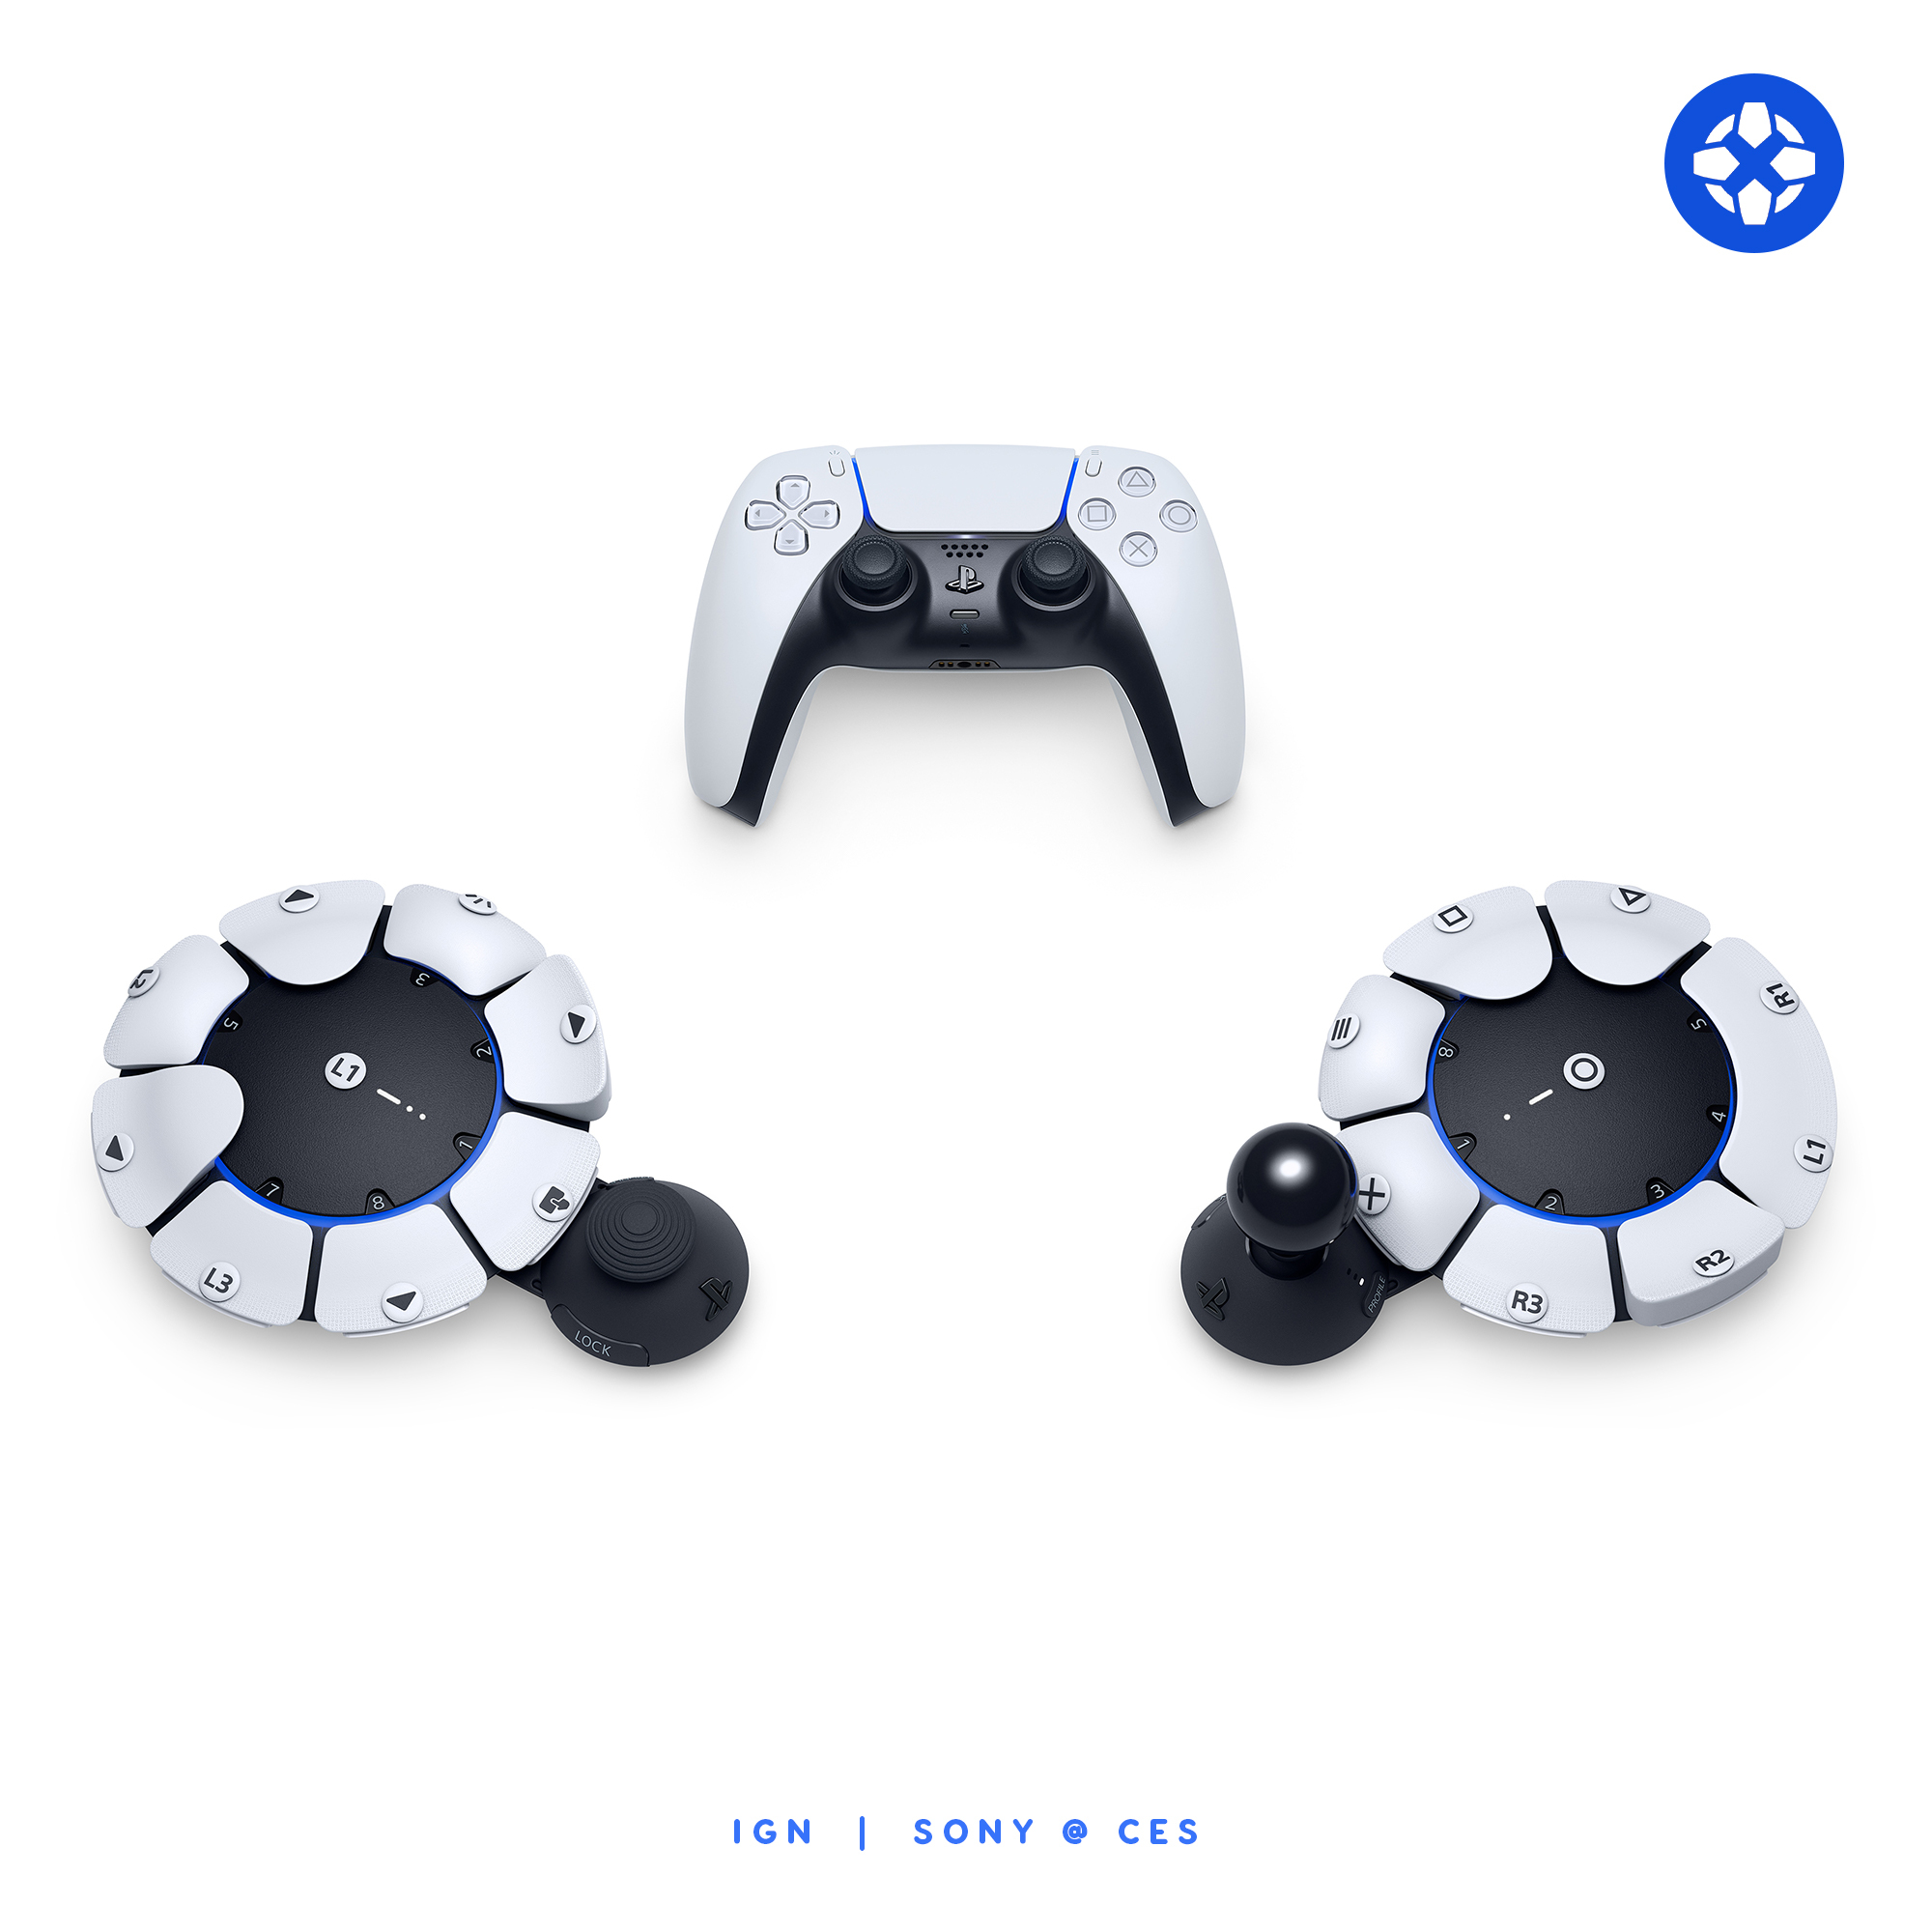 IGN on Twitter: "PlayStation has revealed a brand new accessibility controller kit in development PlayStation 5, and its codename is Project Leonardo. https://t.co/wr56NinAlr" / Twitter